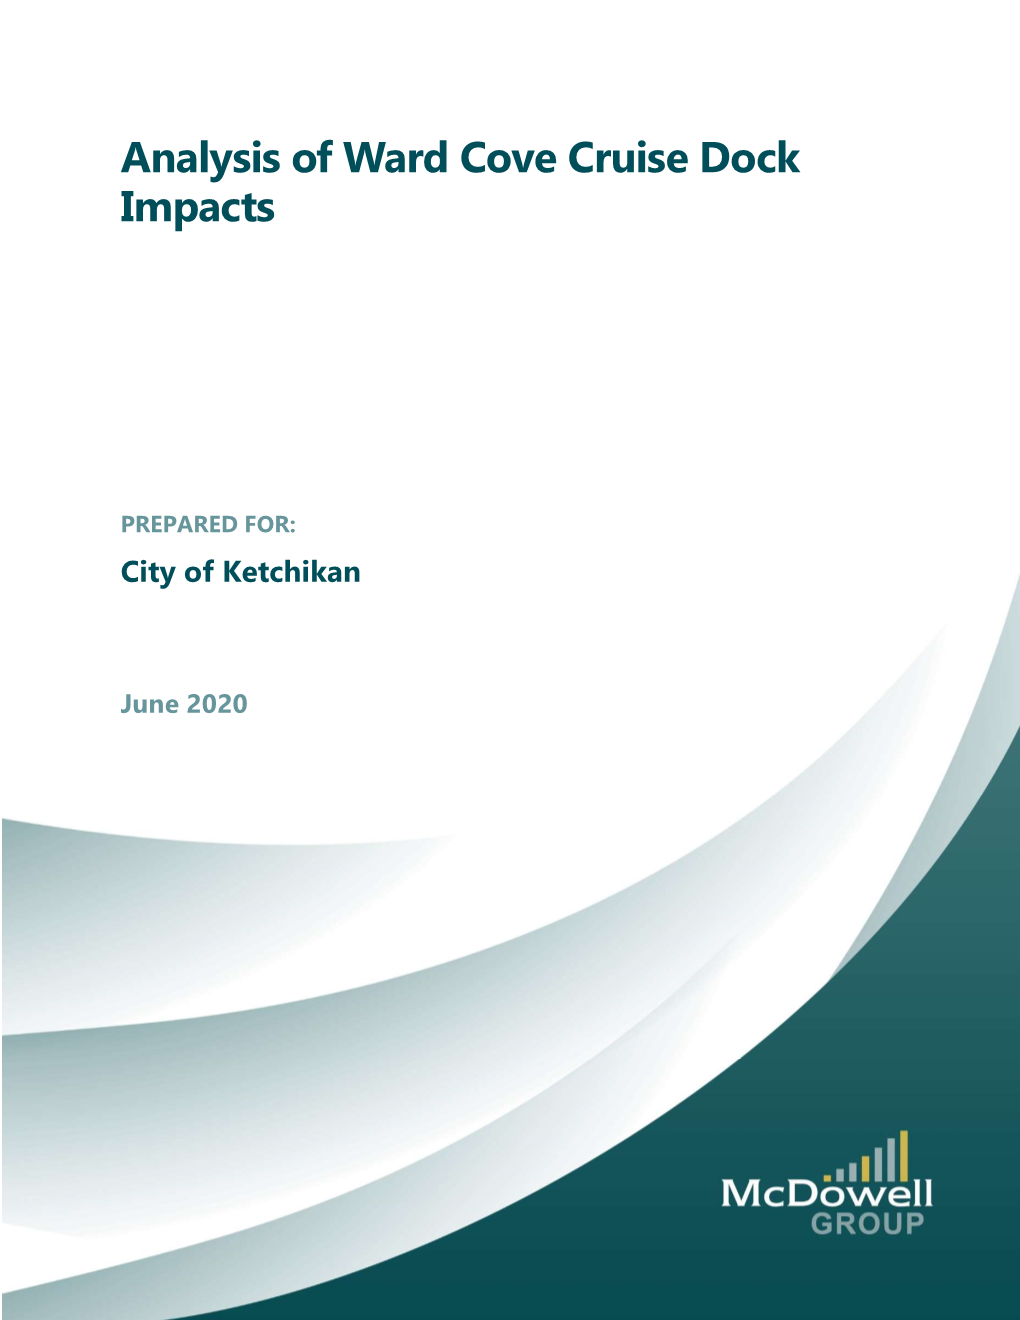 Analysis of Ward Cove Cruise Dock Impacts